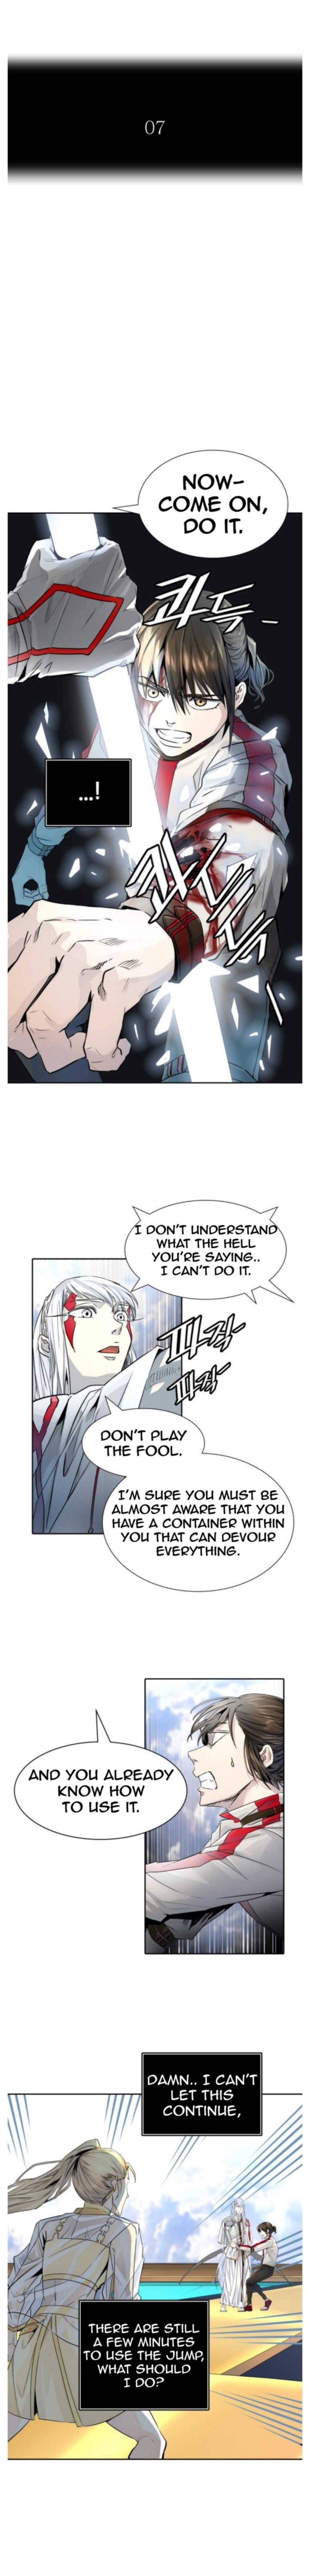 Tower Of God 498 4